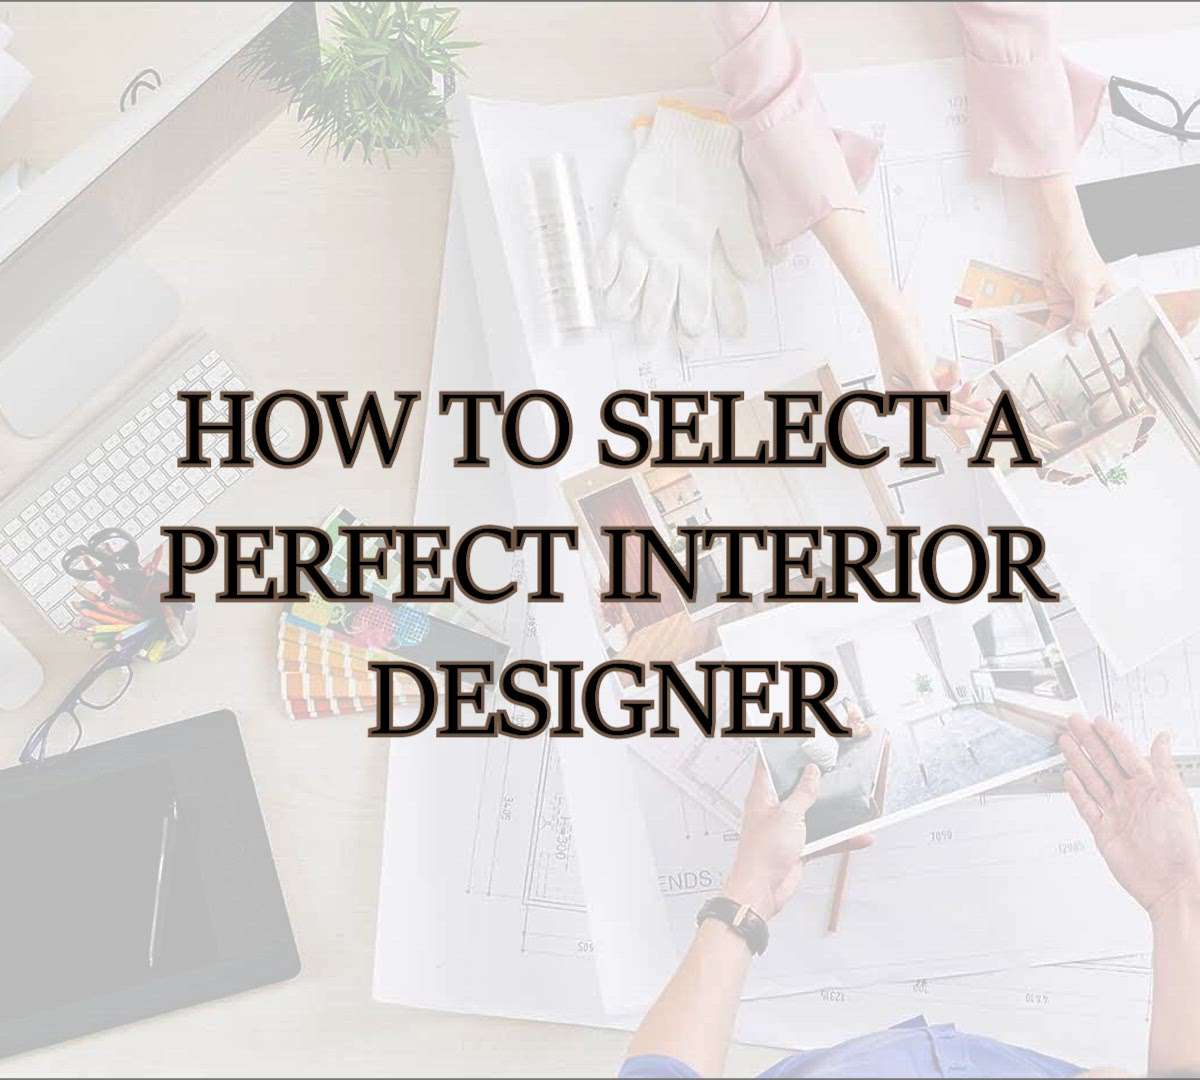 please check the below link for previous video 
Checkout designs added by Amelia Peter on Kolo https://koloapp.in/posts/1629726879

please consider these factors before select a designer for your home. 
#homeinteriordesign #interior #koloapp #creatorsofkolo #creators #kolo #kerala #kochi #interiortips #qualitiesofinteriordesigner #home #interior #designer #designerstories #communication #home #essential #musthave